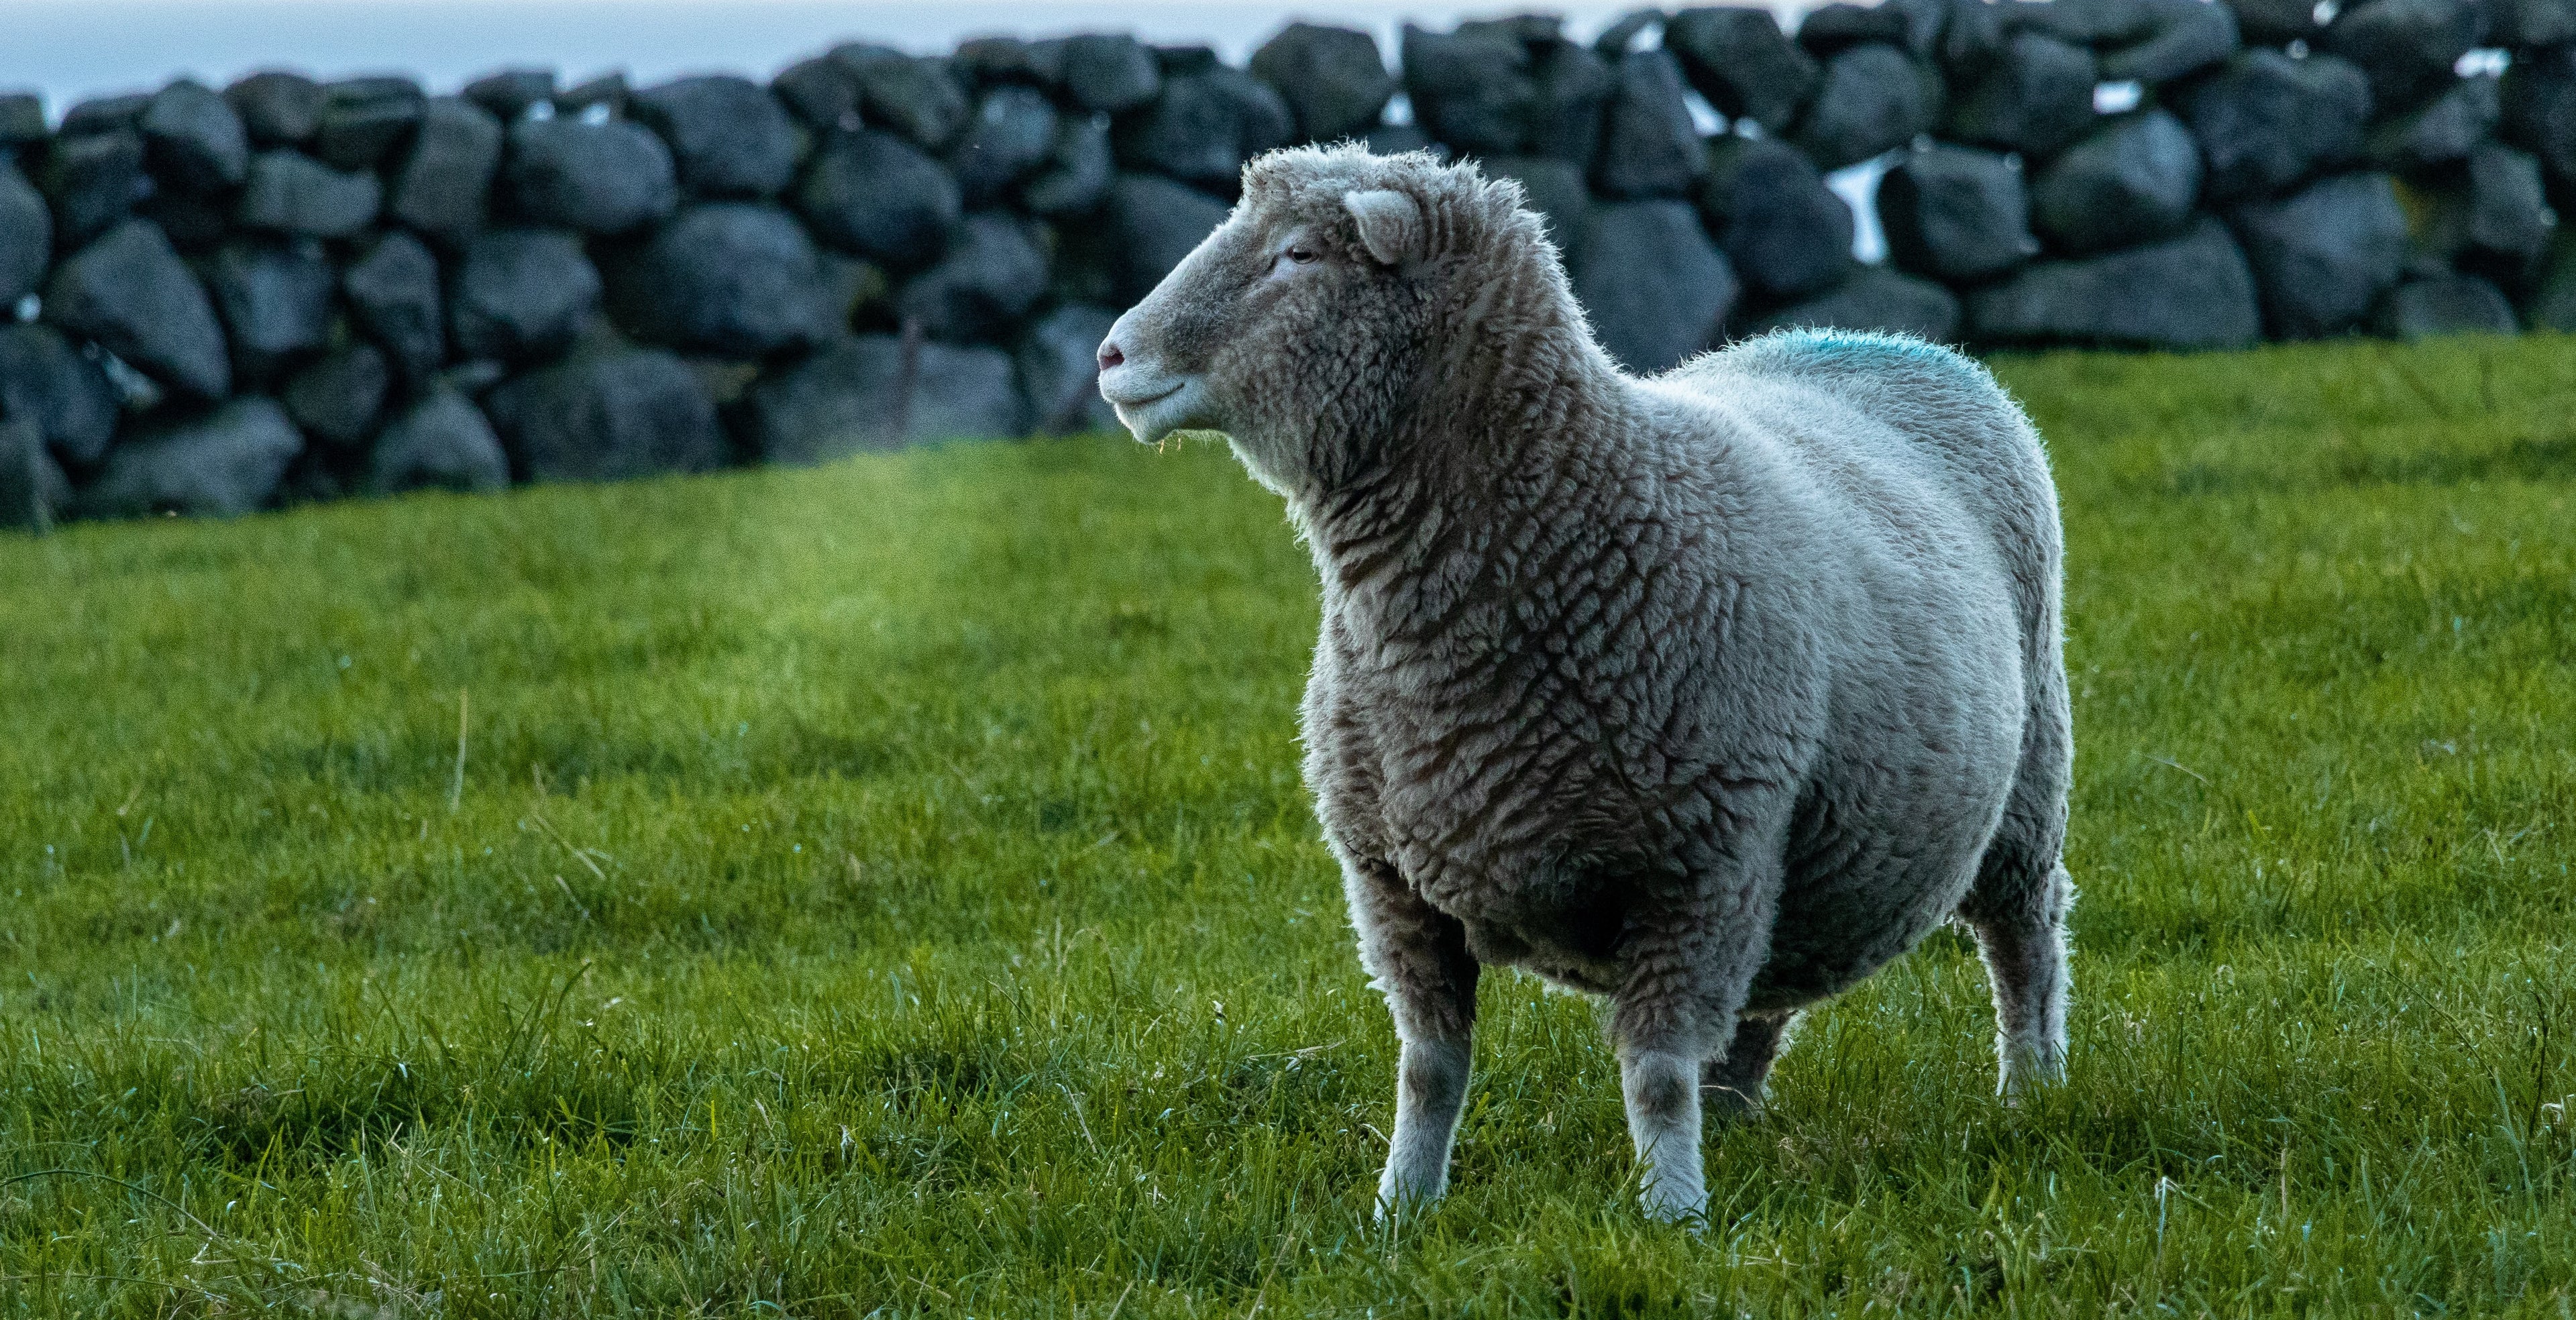 image of a sheep standing in a field with a stone fence behind. photo by tomas malik on unsplash